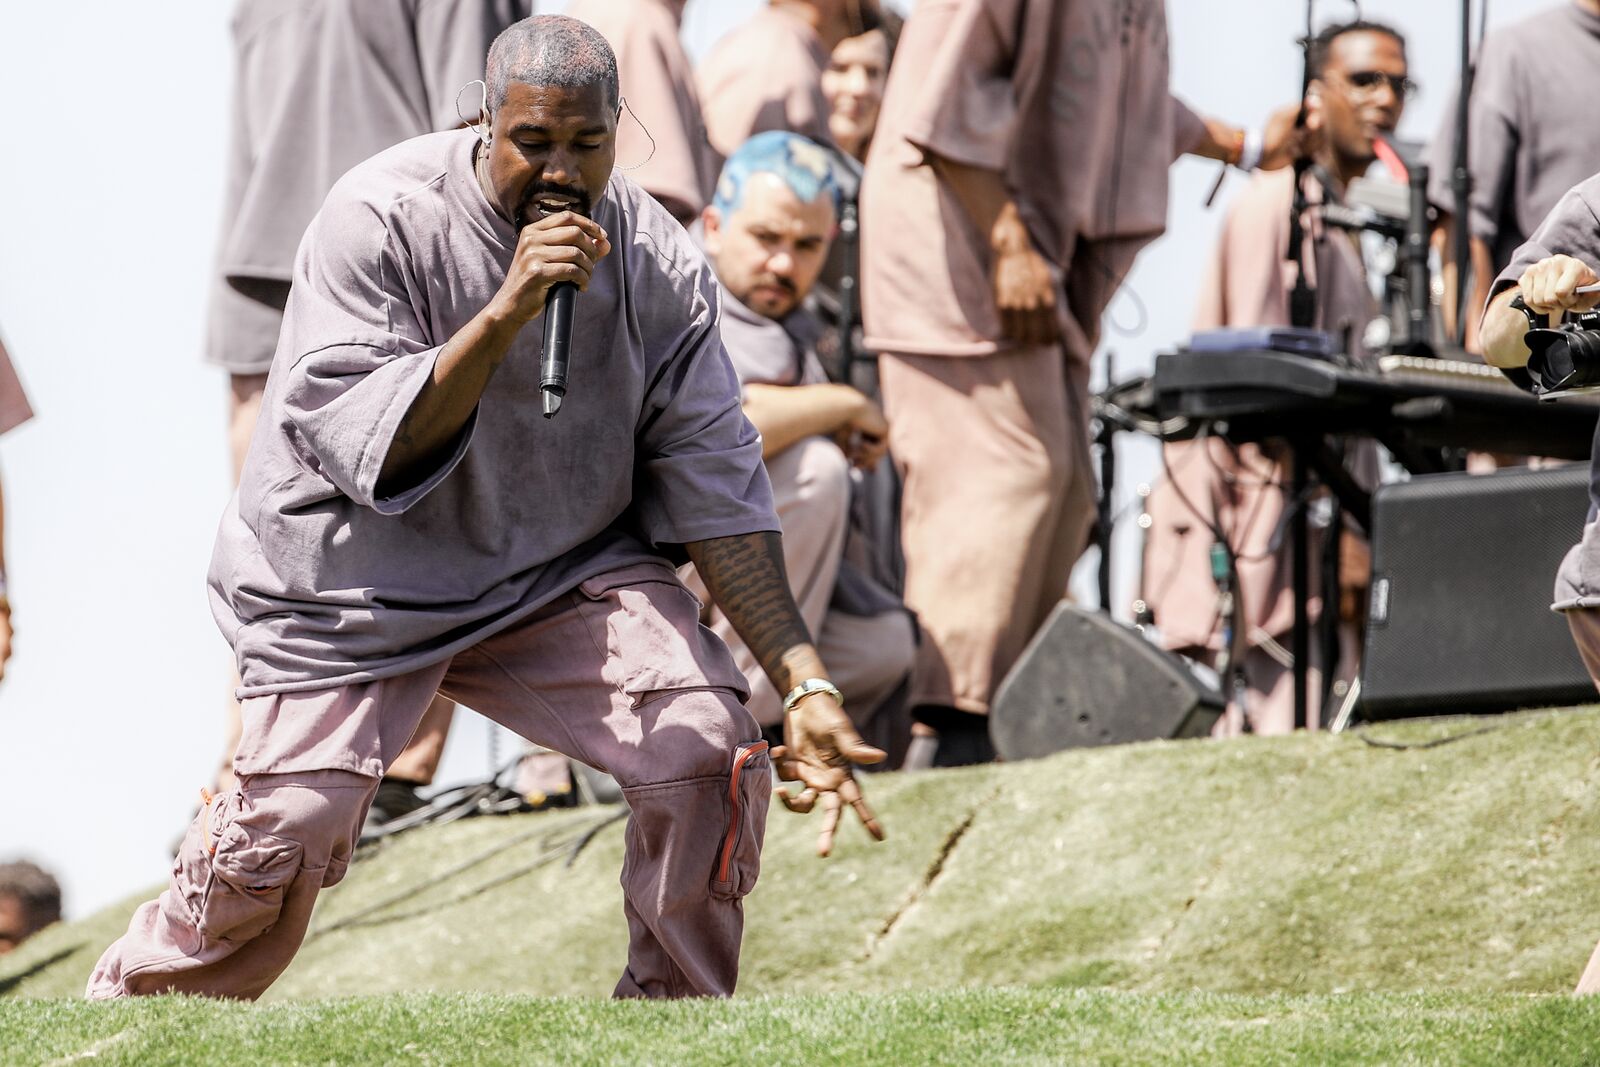 Kanye West performing at his Sunday Service in California | Source: Getty Images/GlobalImagesUkraine